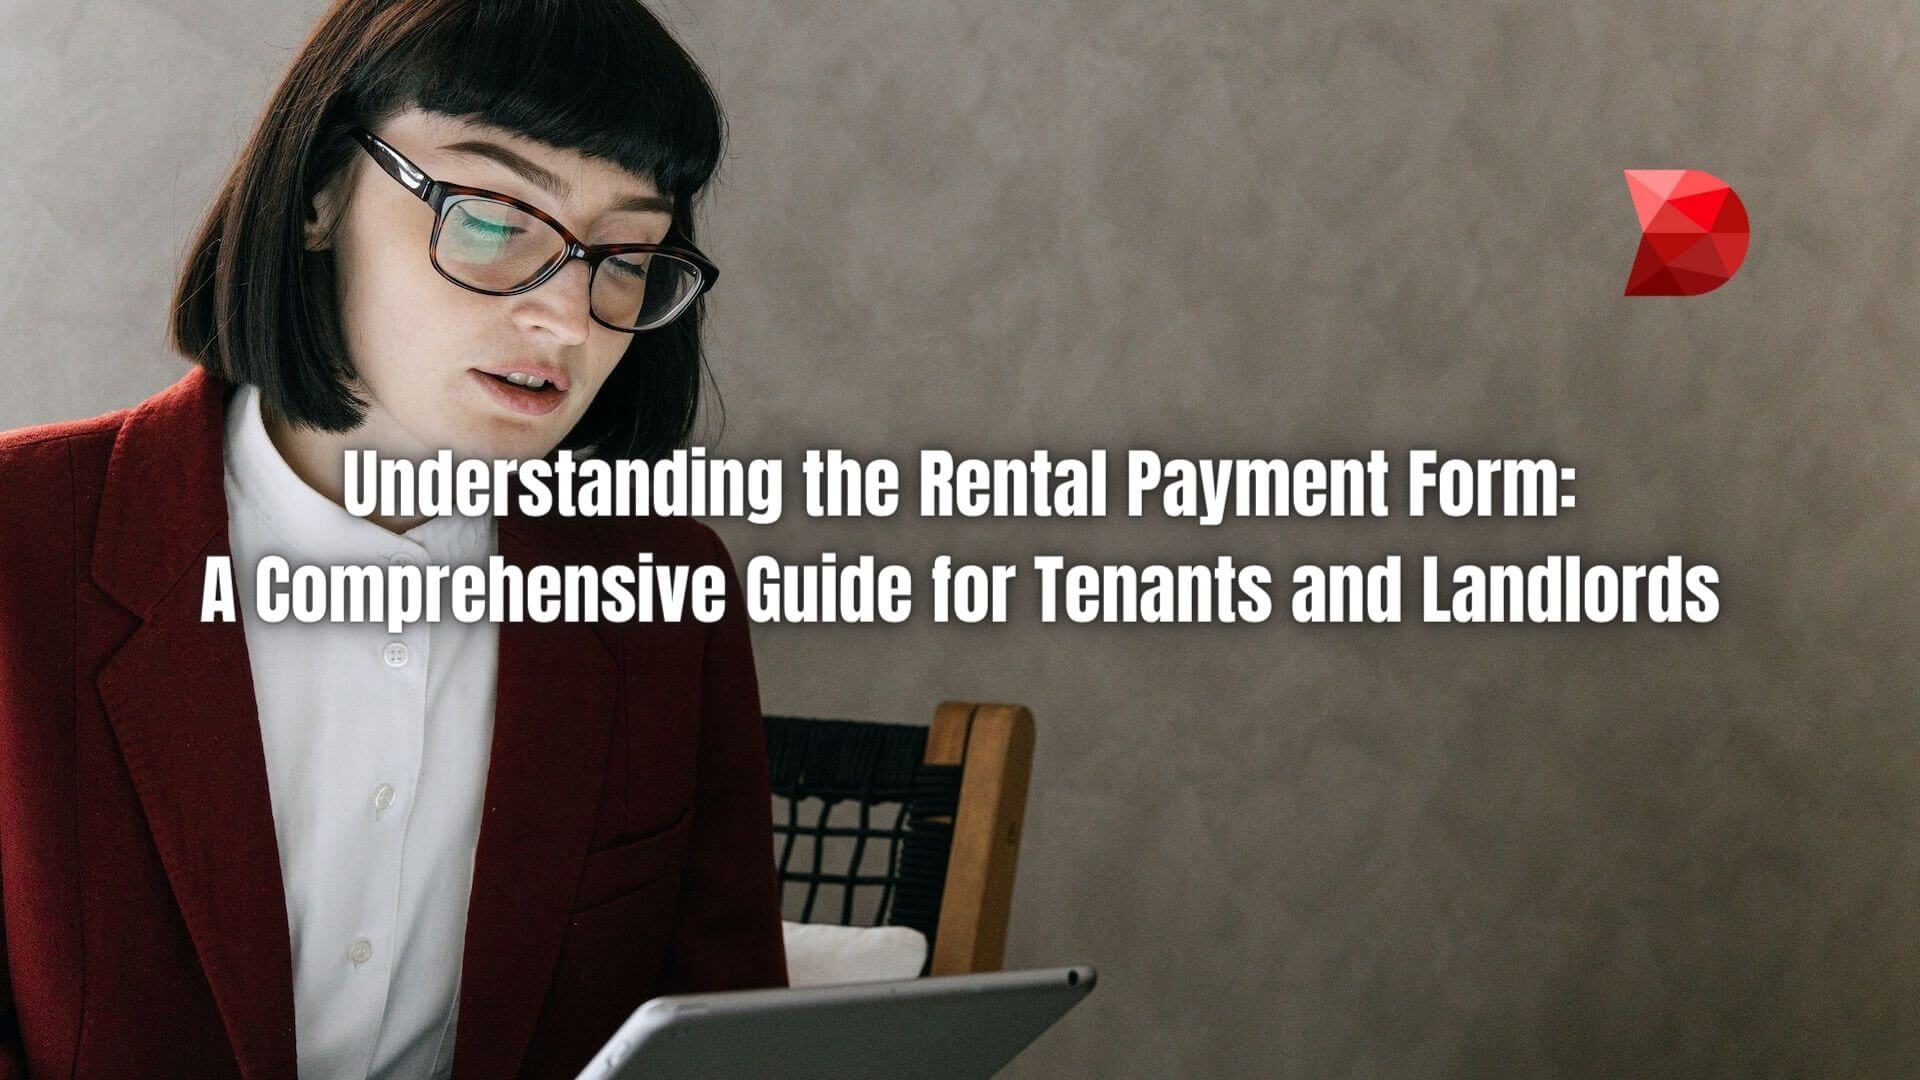 A Rental Payment Form is designed to help landlords and letting agencies effectively track and manage their rental payments. Learn more!